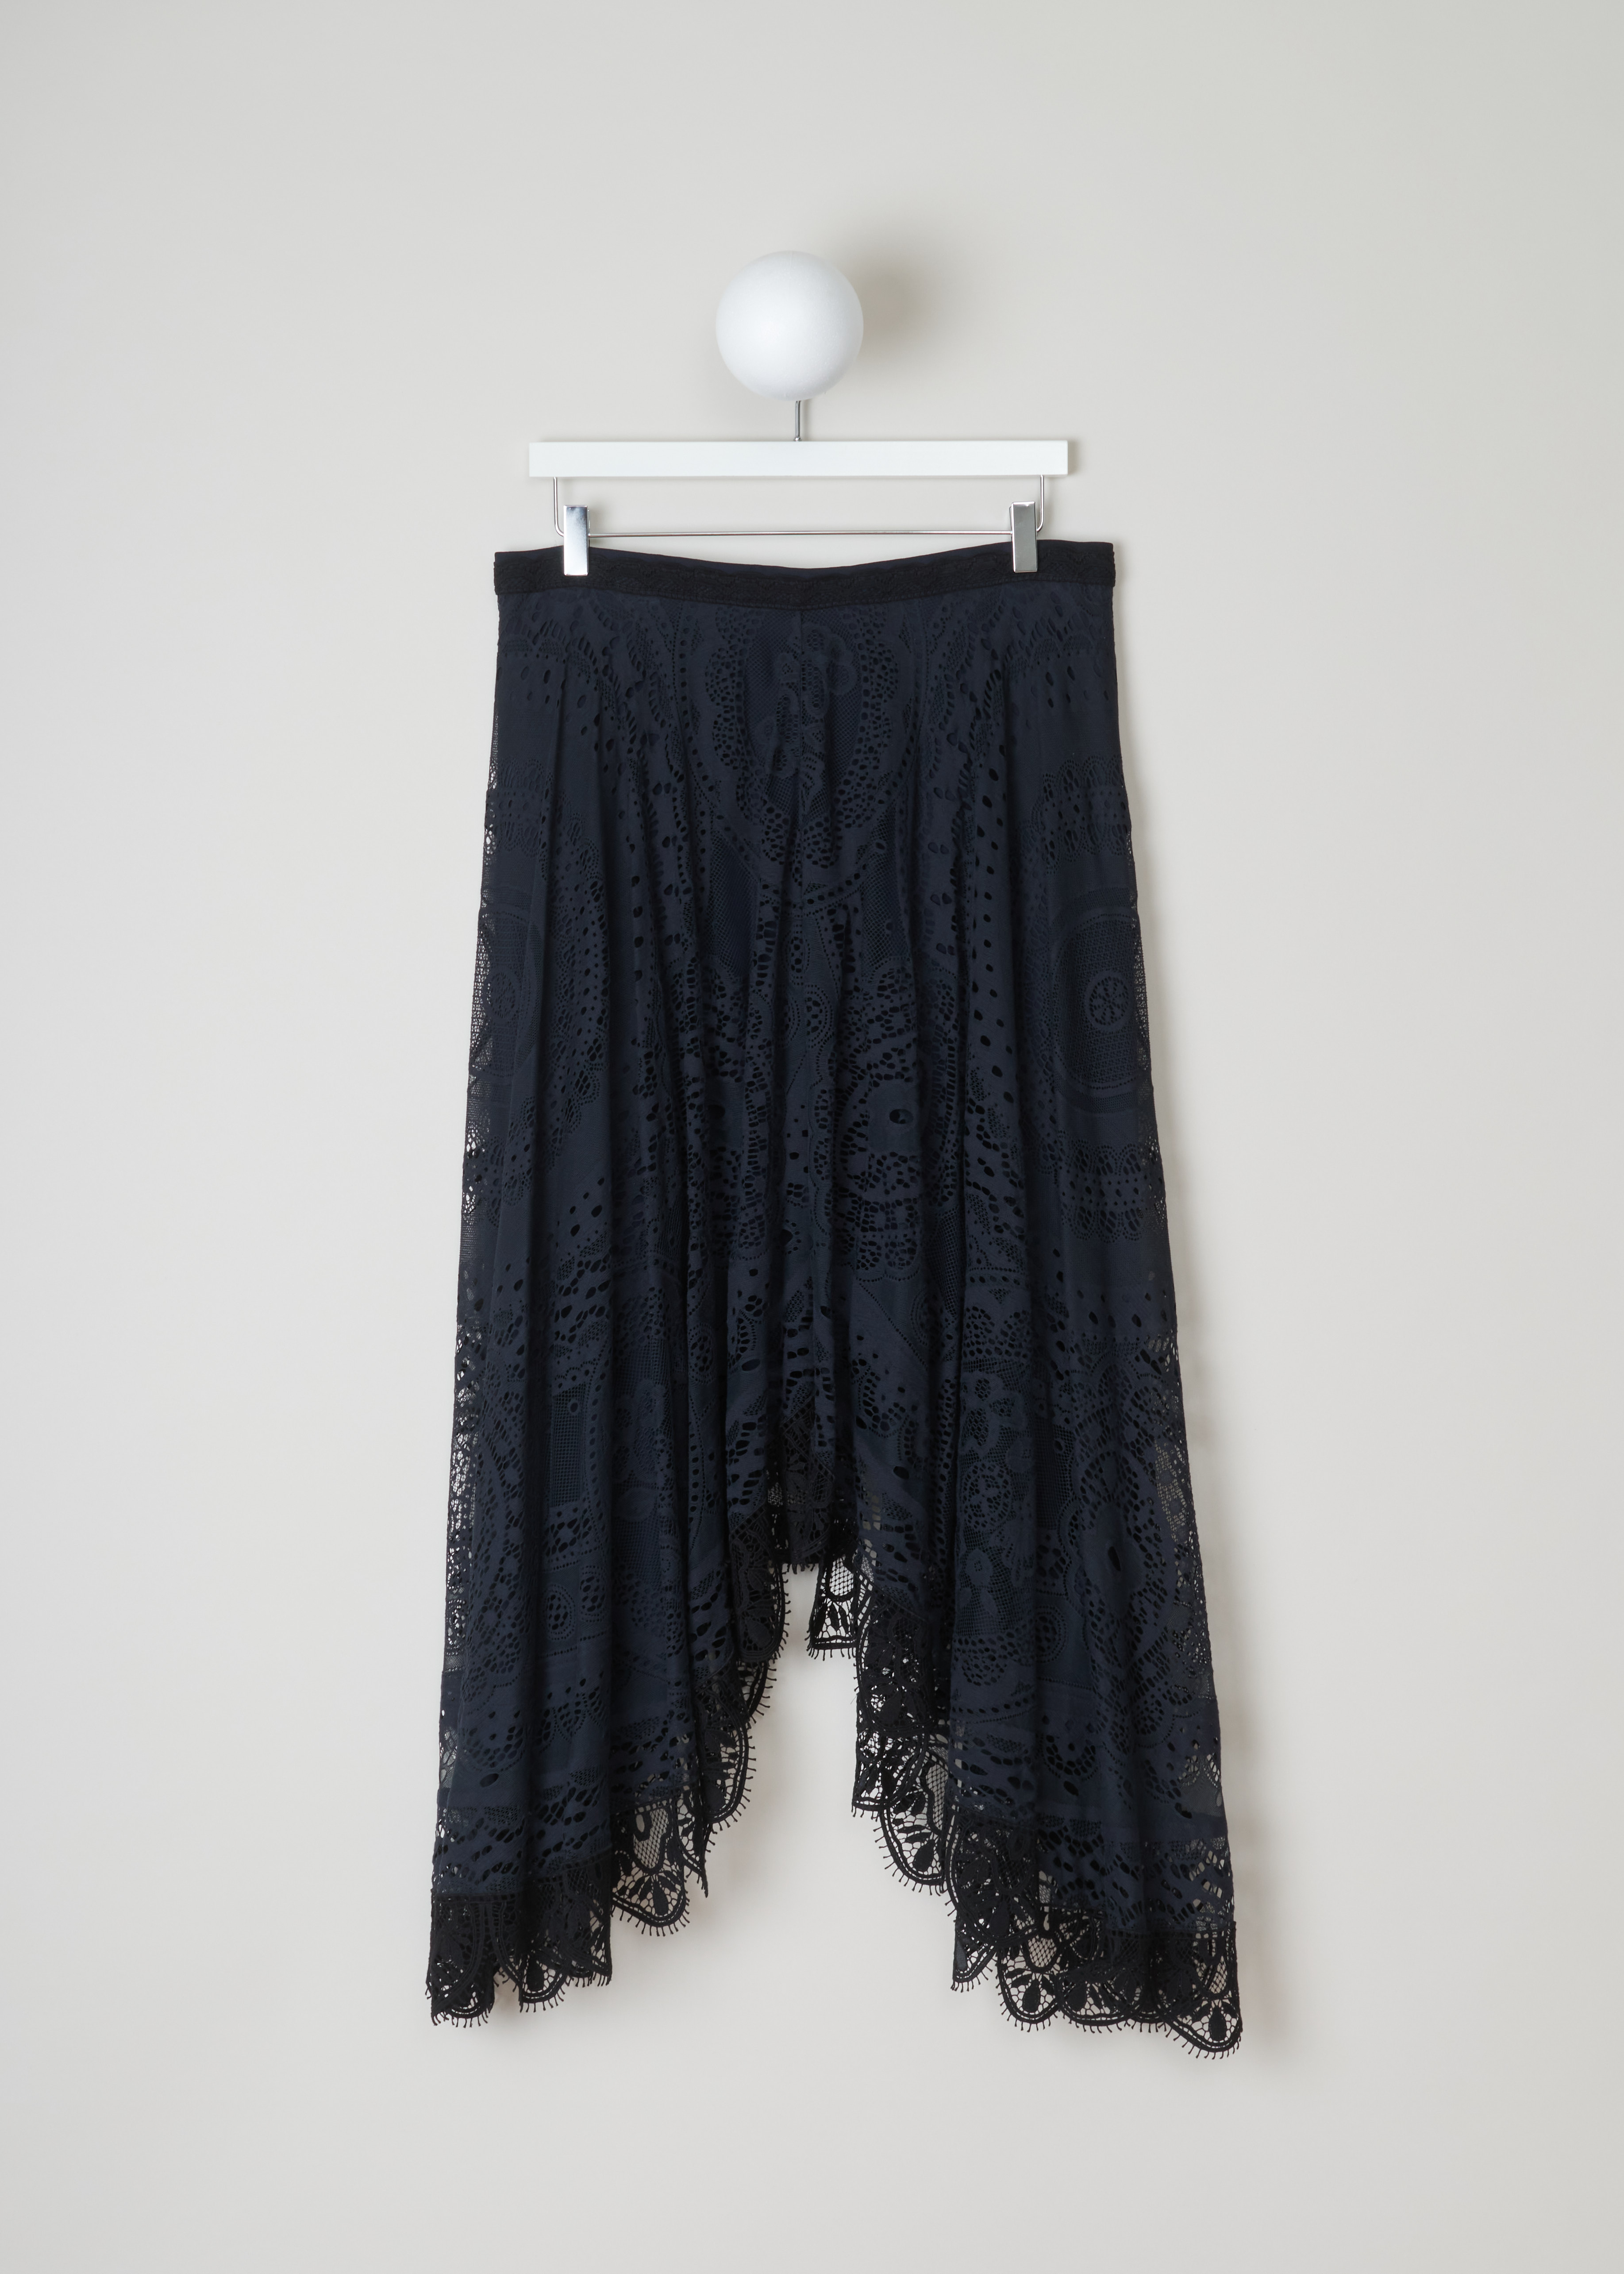 Chloé, Navy lace skirt in an asymmetric model, CHC18SJU0540448A_48A_iconic_navy, blue, front. Lace skirt in navy, cut to an asymmetric model. It has a concealed zipper on the back and frilled hem. The skirt has a slim waist band and a wide fit which causes the skirt to pleat all-round. 